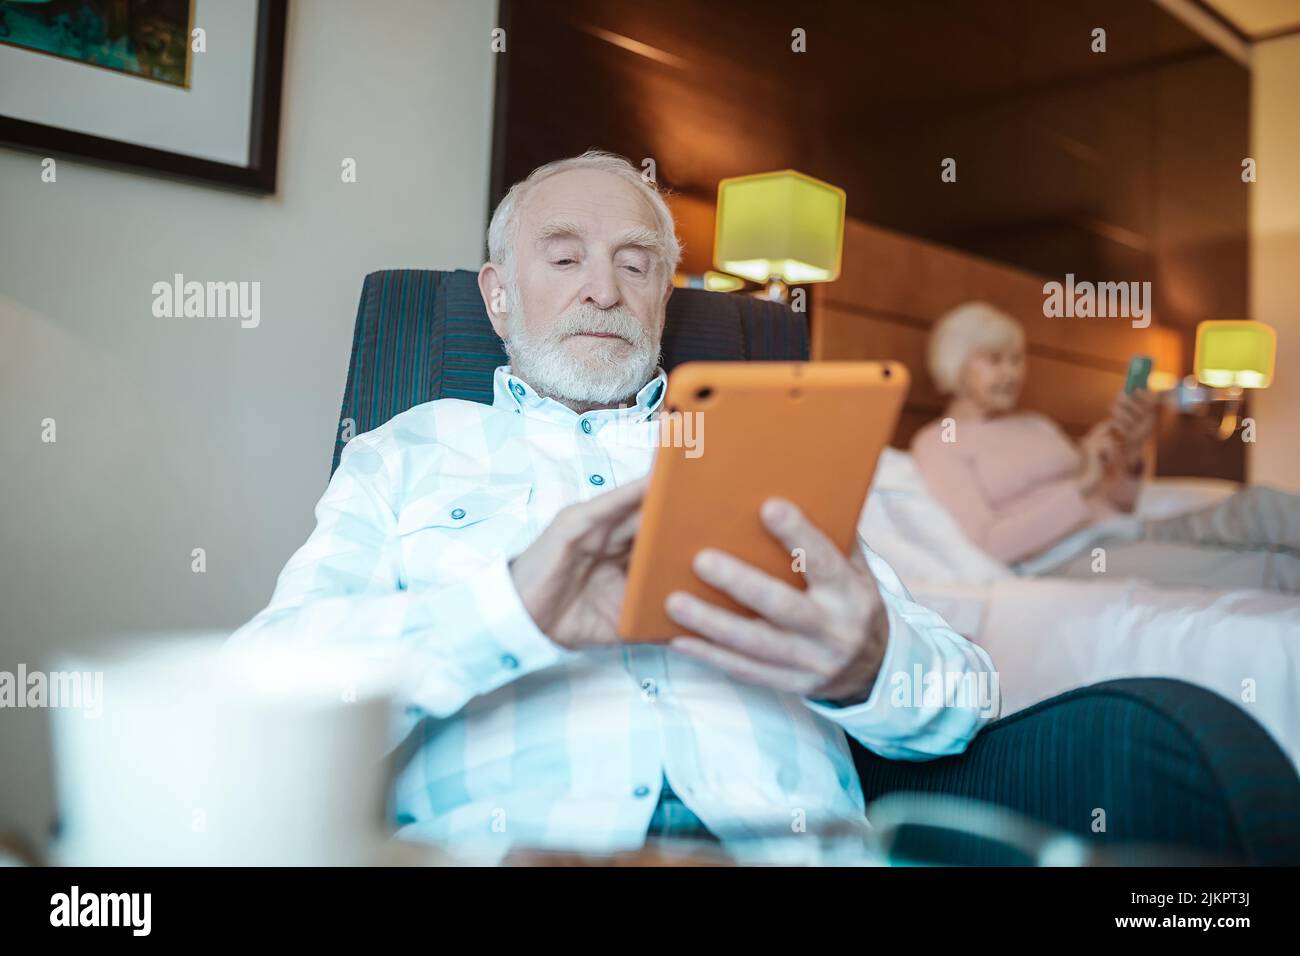 Gray-hired bearded man with tablet in hands looking thoughtful Stock Photo